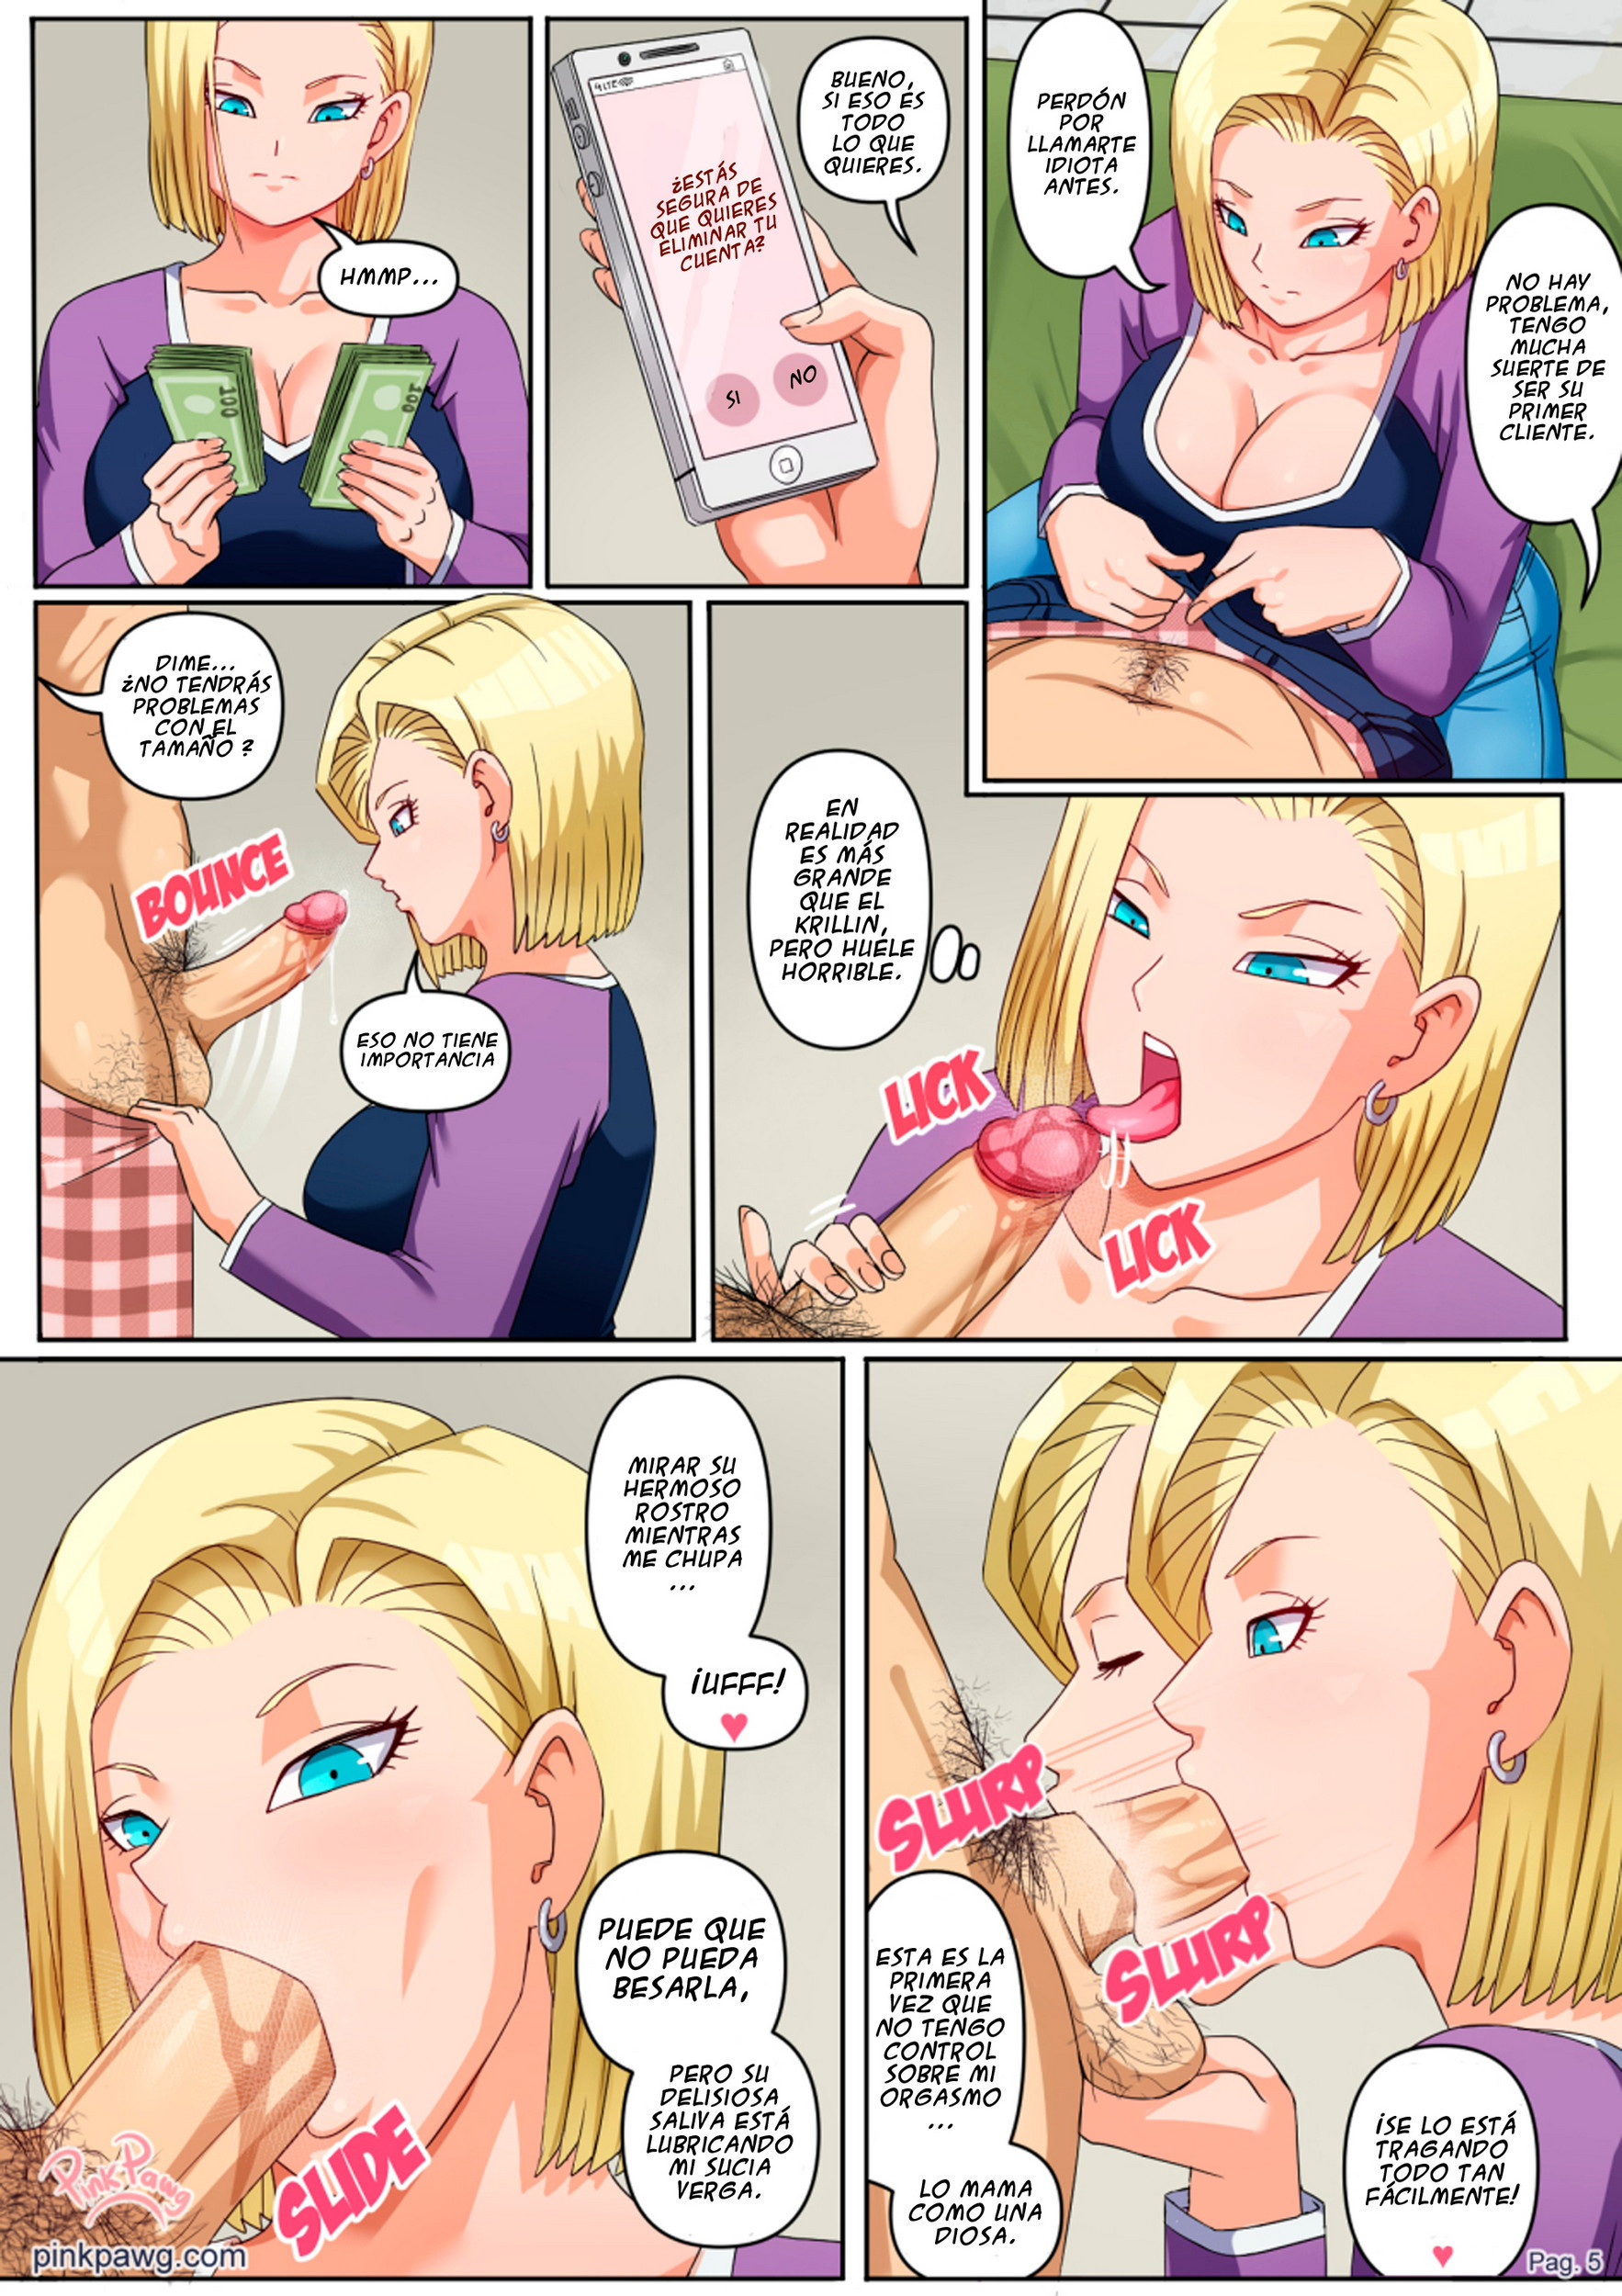 [Pink Pawg] Android 18 NTR Ep.4 - 4